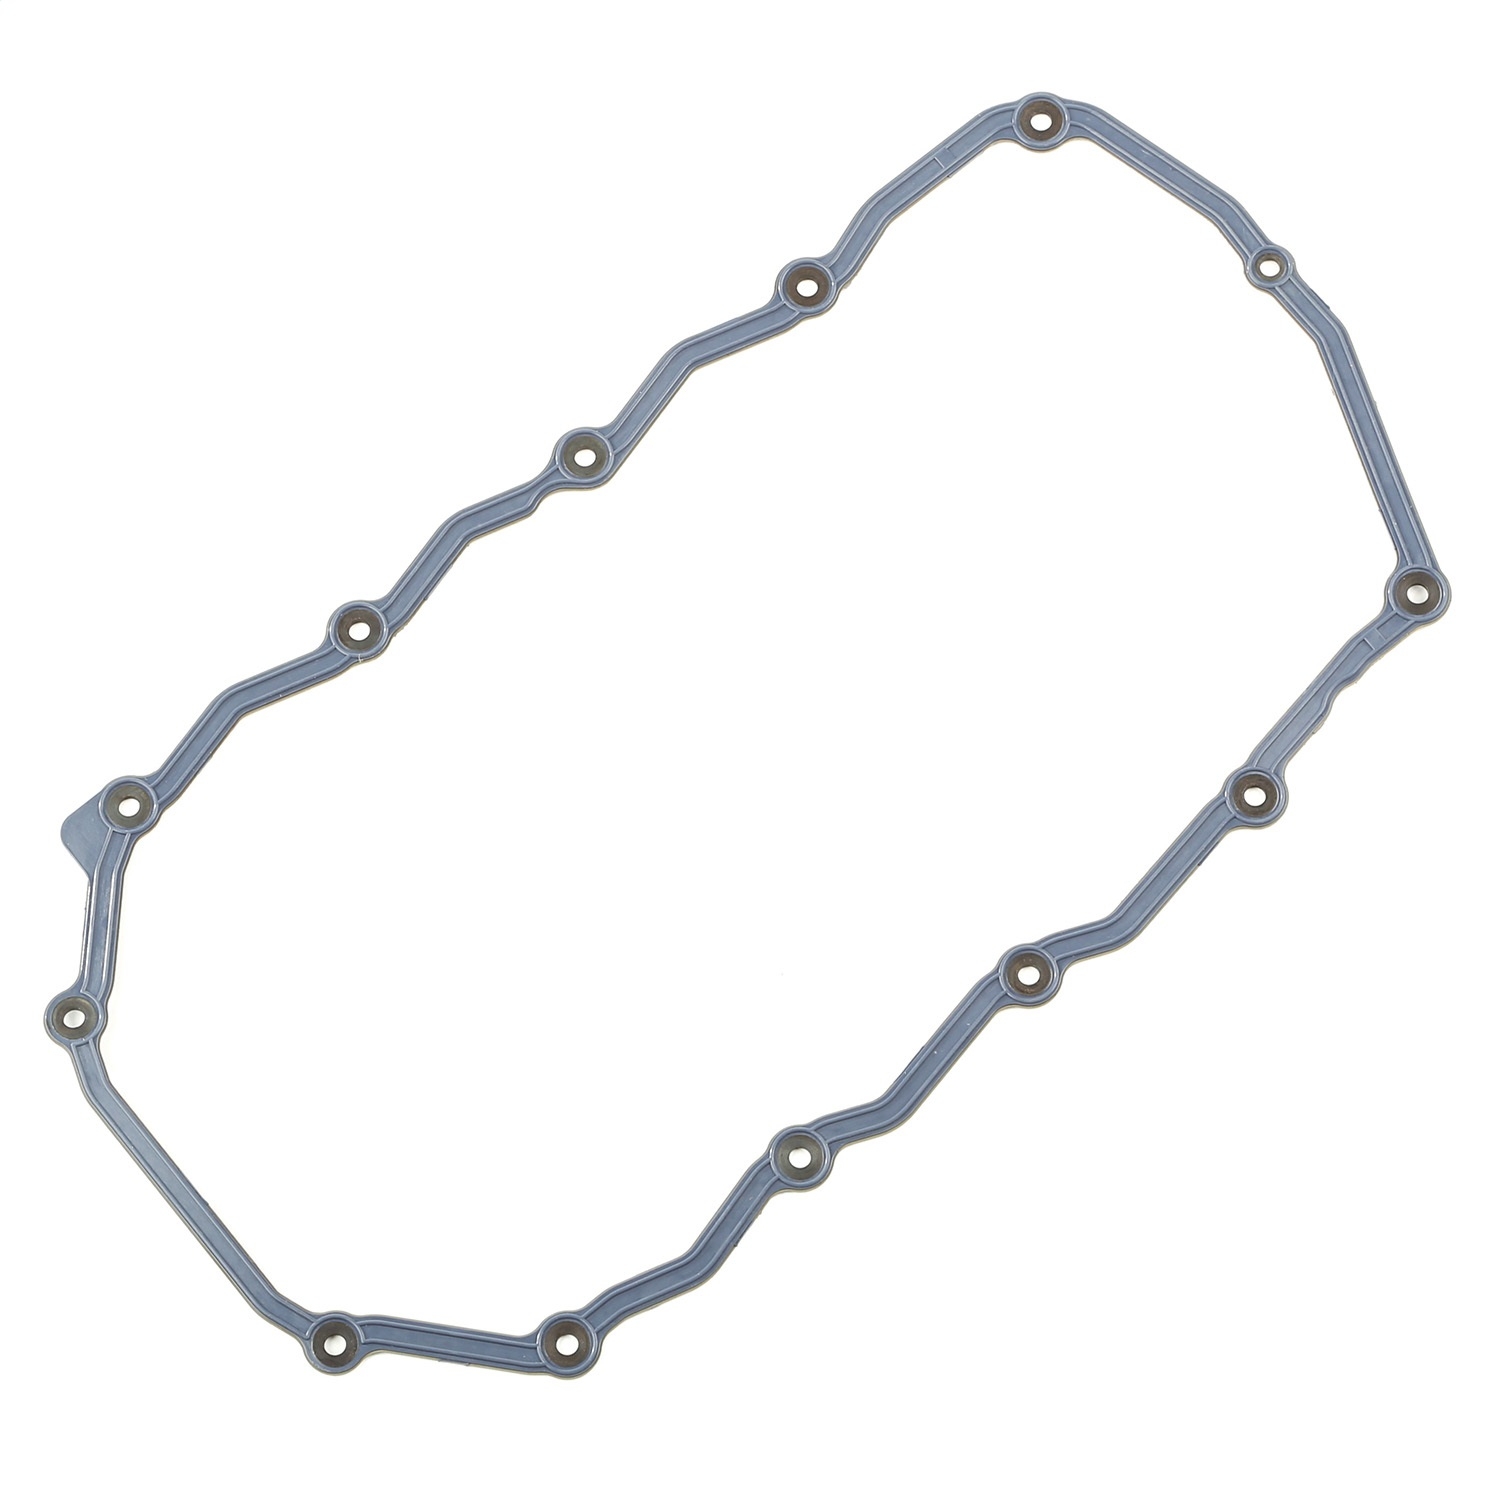 Omix This Oil Pan Gasket From Omix Fits 2.4L Engines Found In 02-05 Jeep Liberty And 03-06